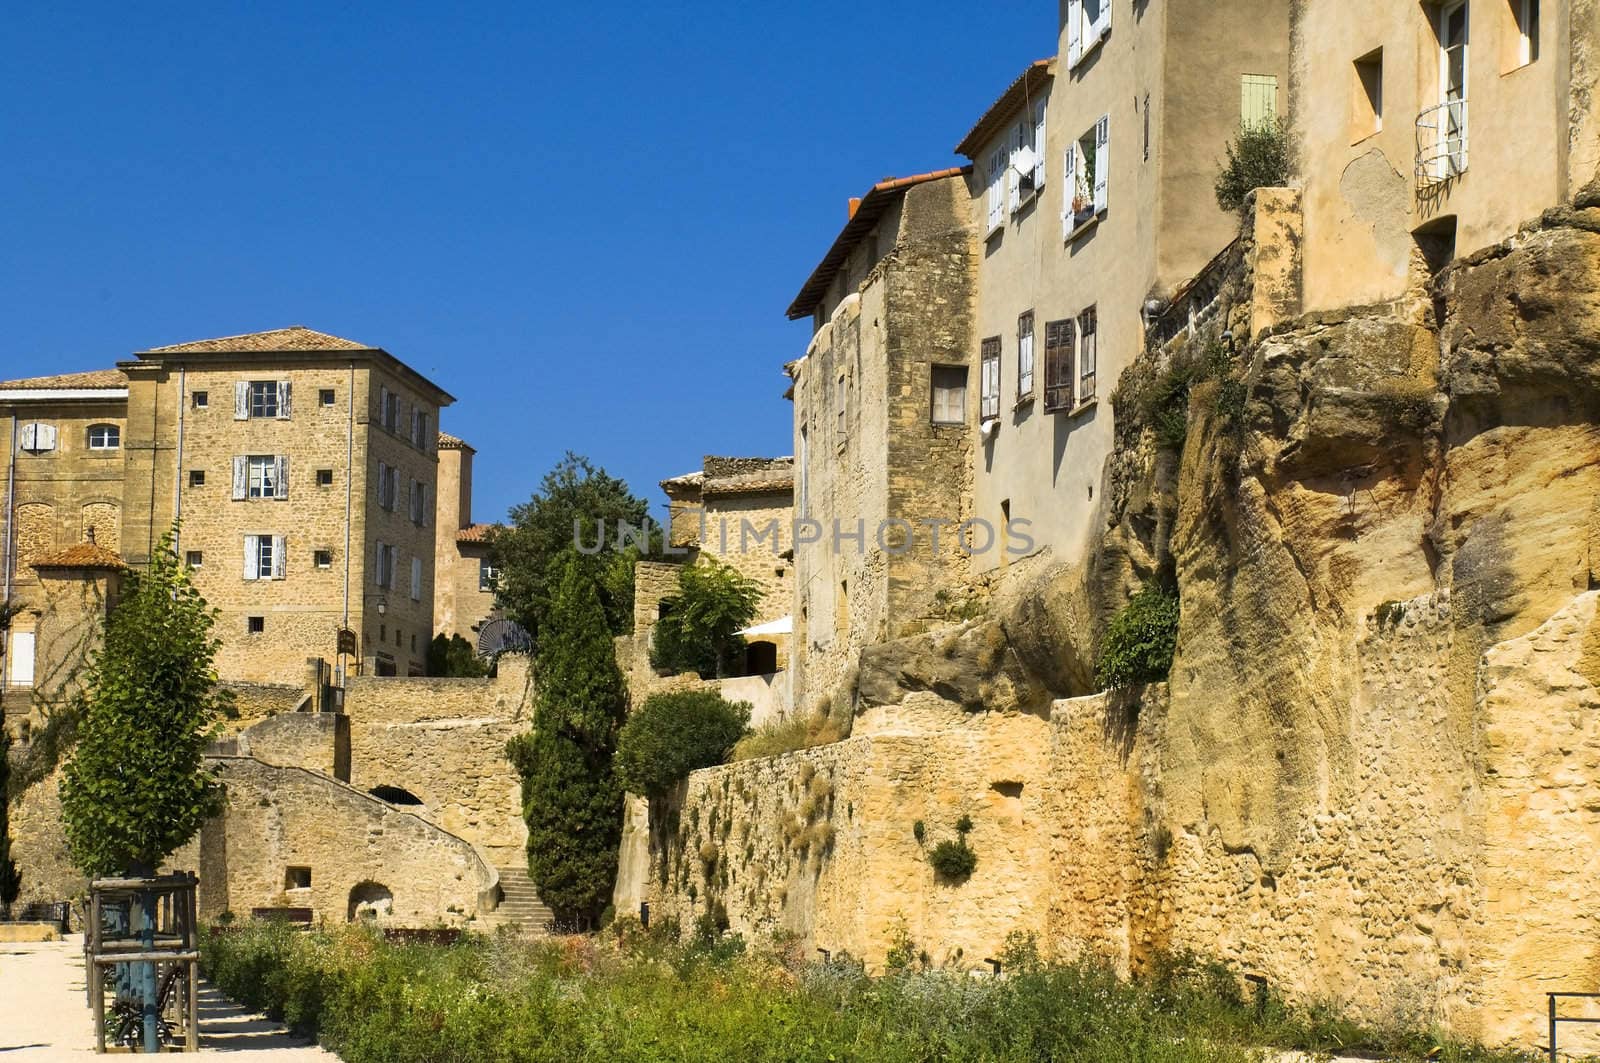 old stone houses built on the rock, region of Luberon, Provence, France